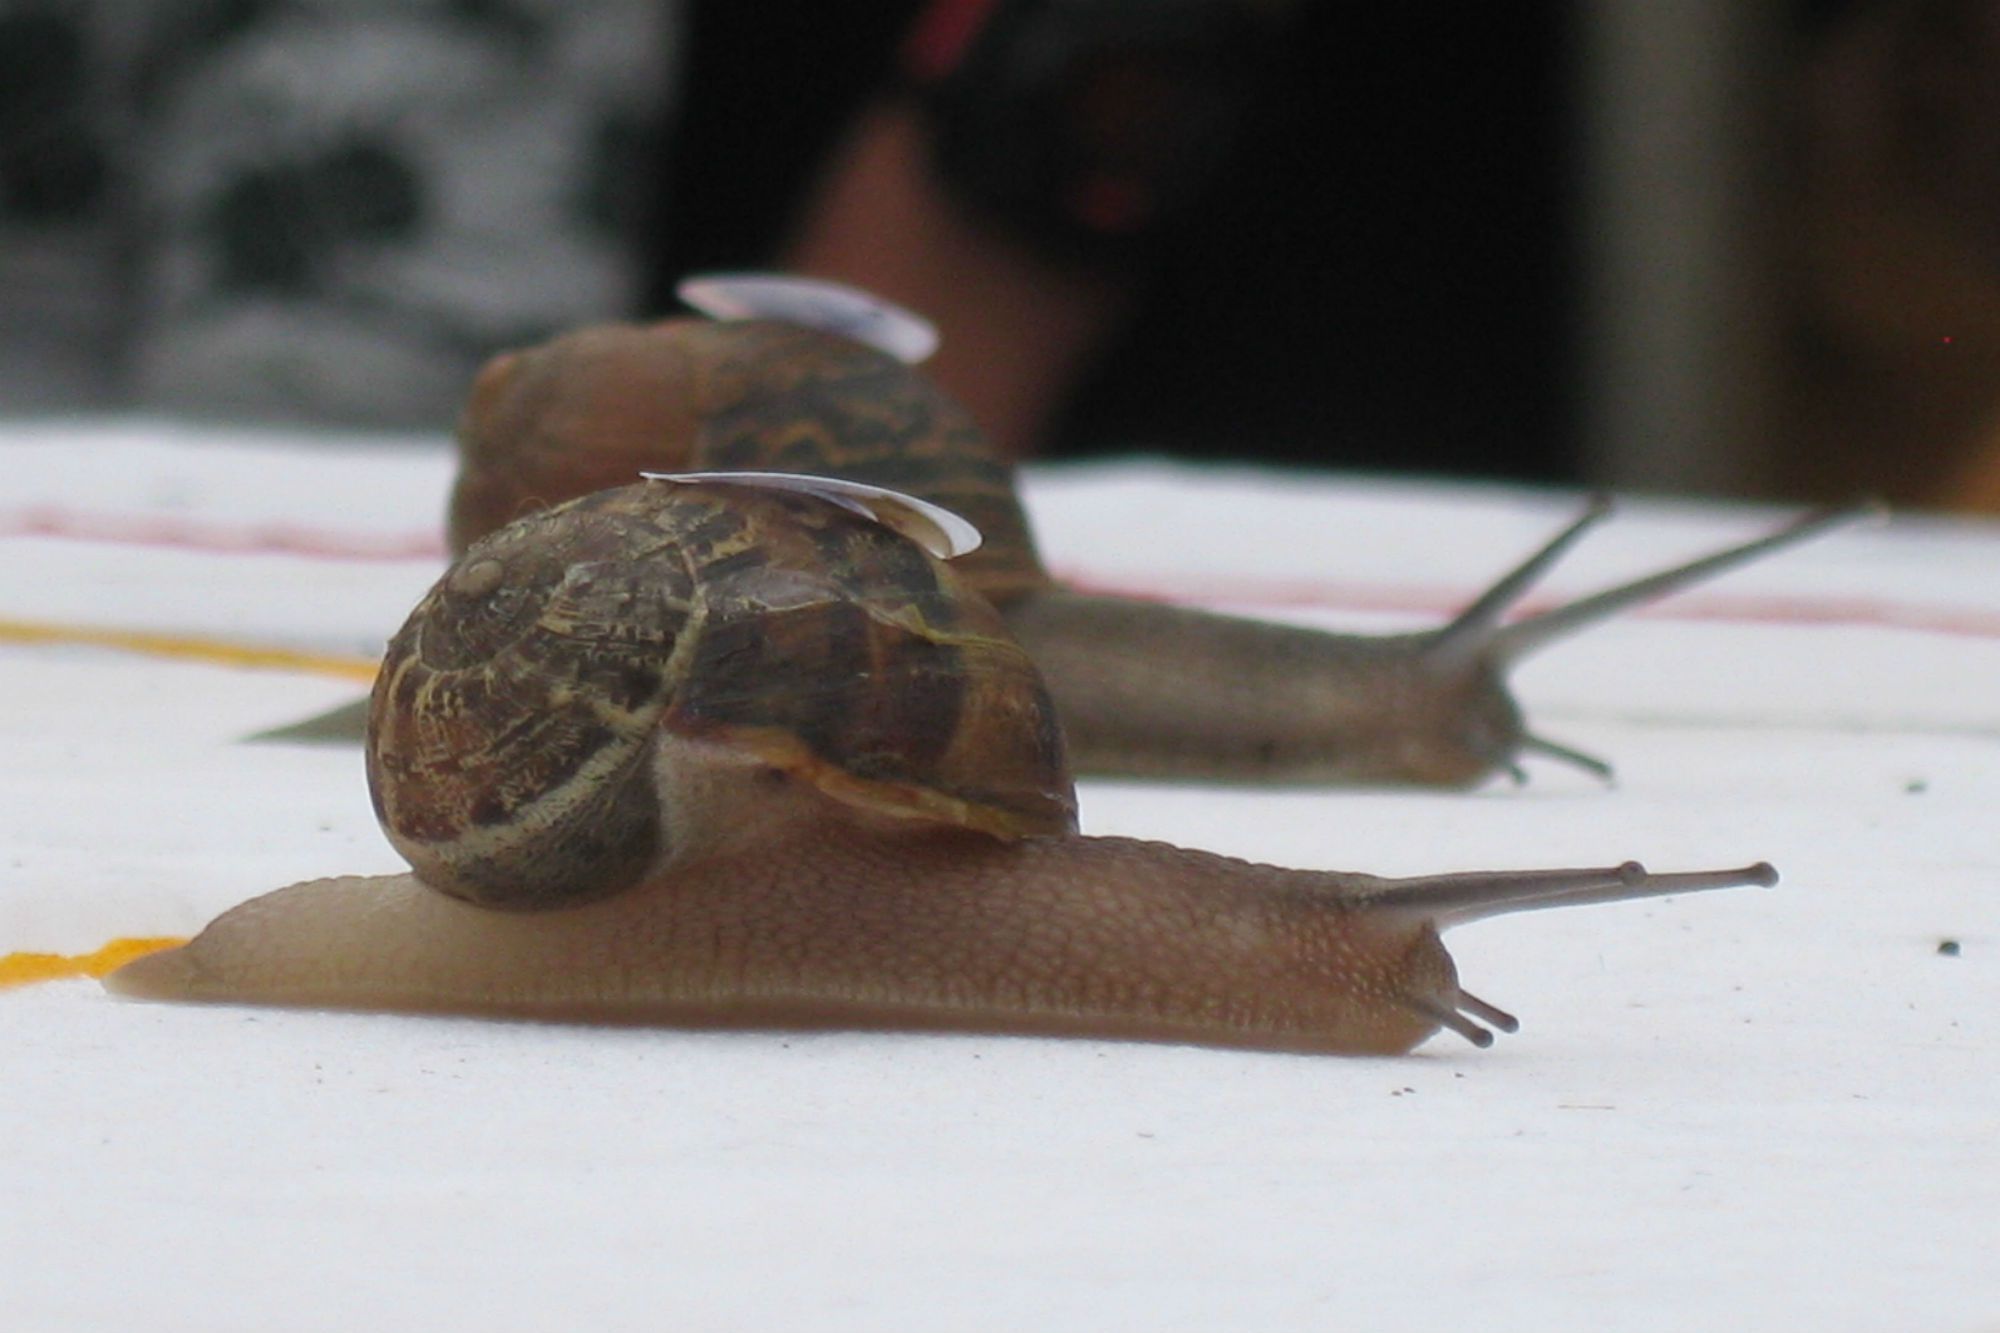 Larry the snail wins World Snail Racing Championships